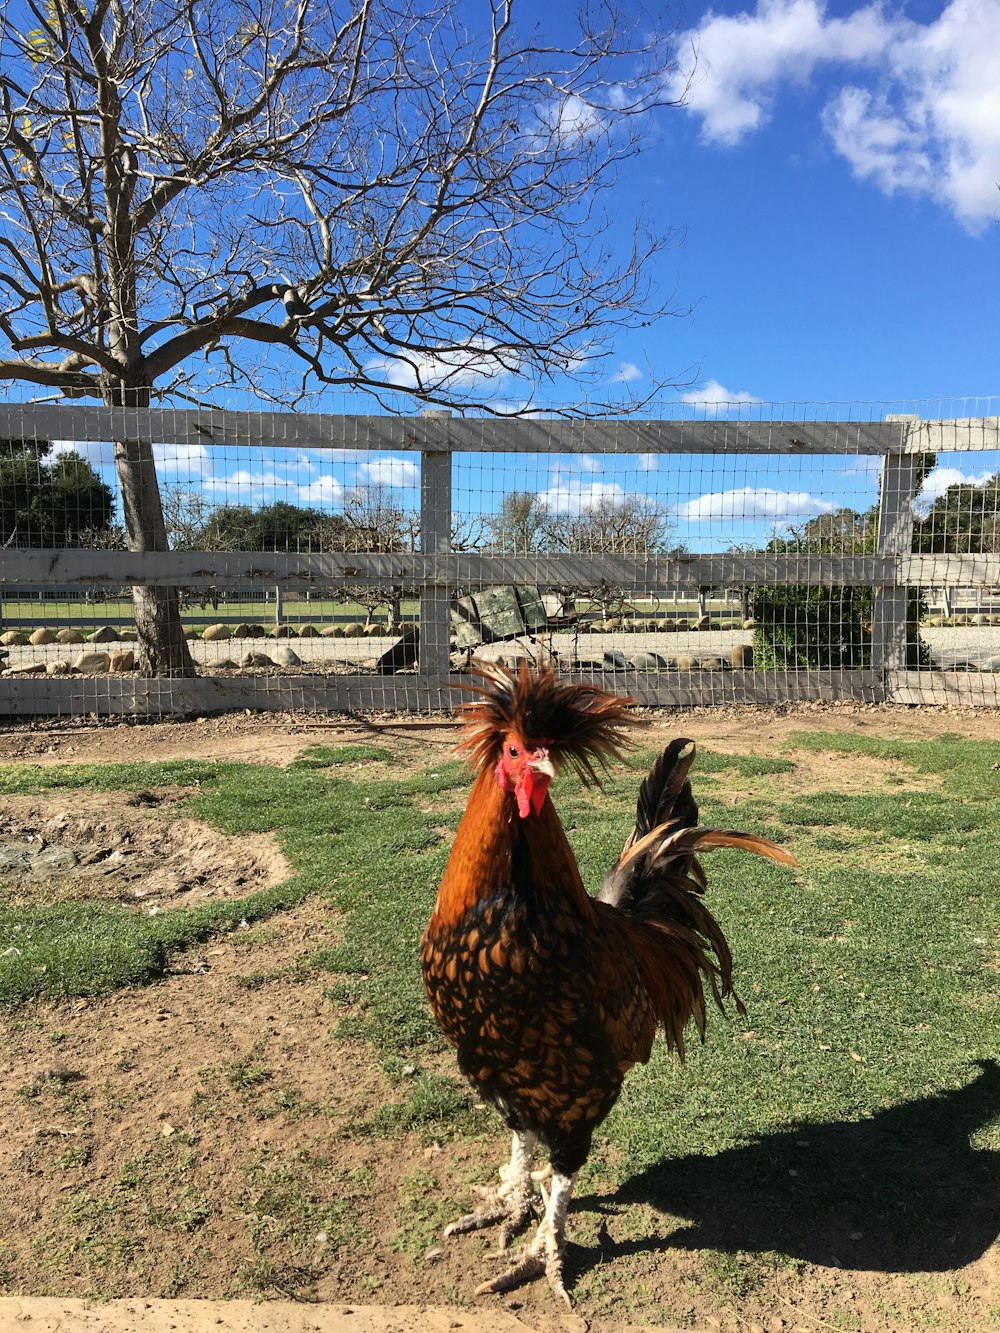 a rooster standing on grass